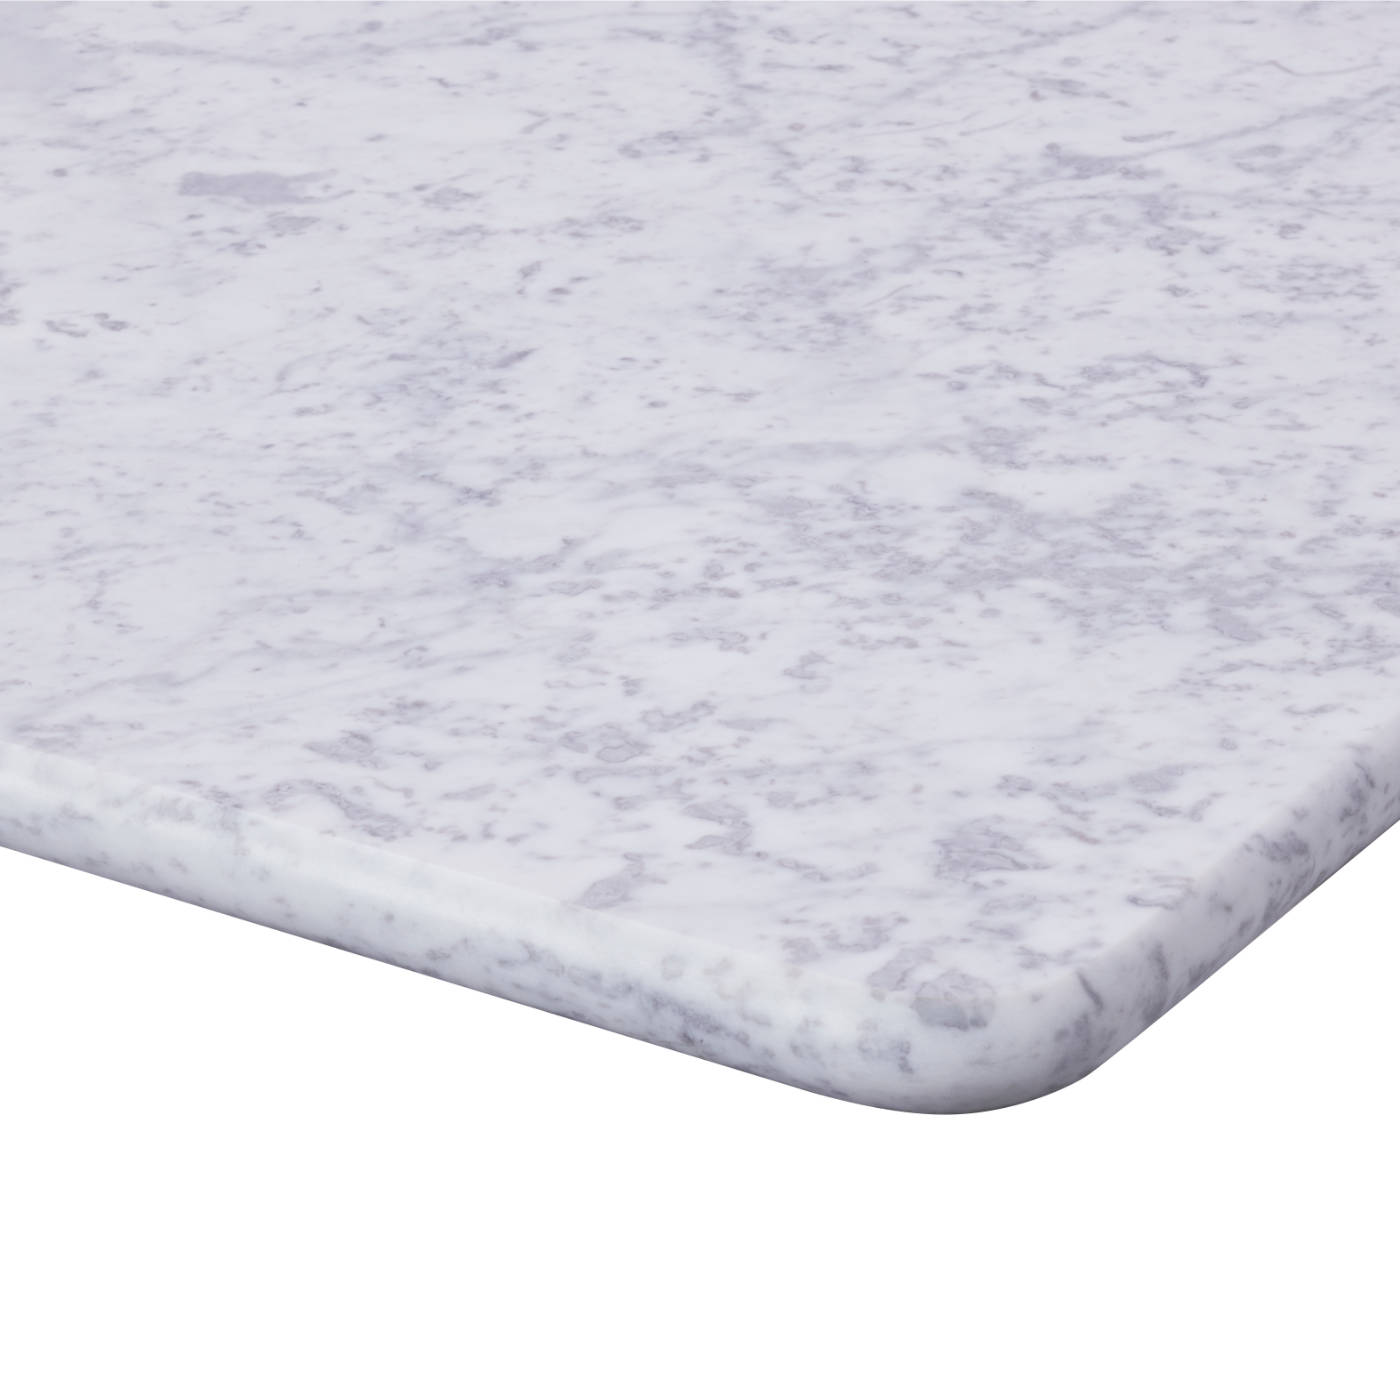 70x60 cm Square Tabus Solid Carrara Marble Table Top – 20mm thick